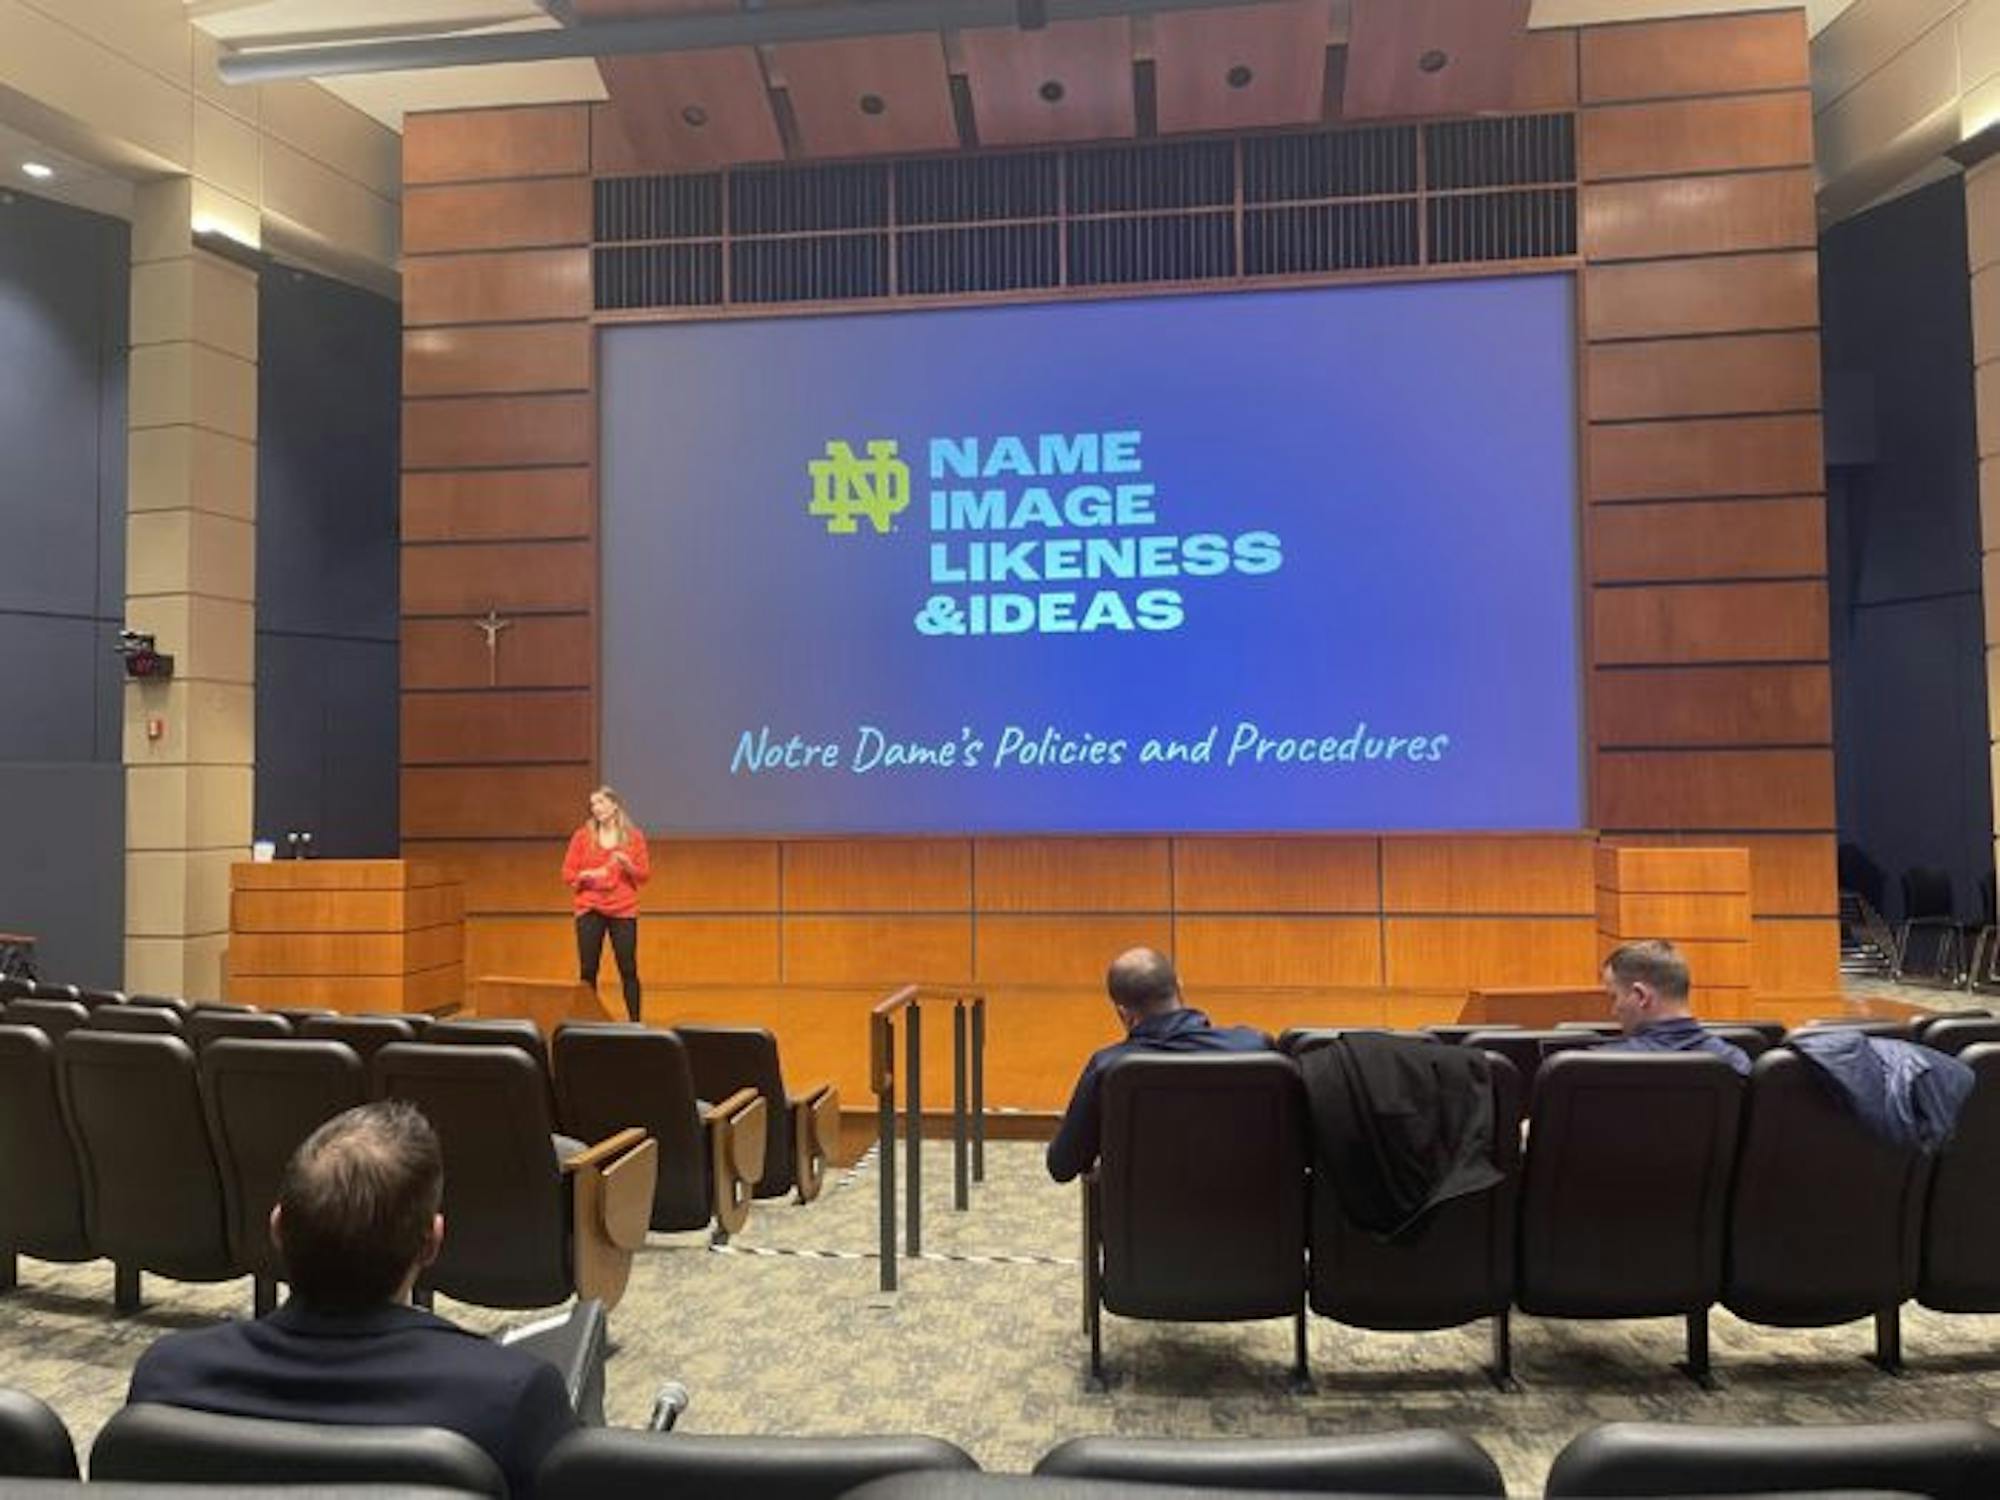 Senior associate athletic director Claire VeNard details Notre Dame's NIL policies, from not violating Du Lac to partnerships with marketplaces ran by Notre Dame alumuni.